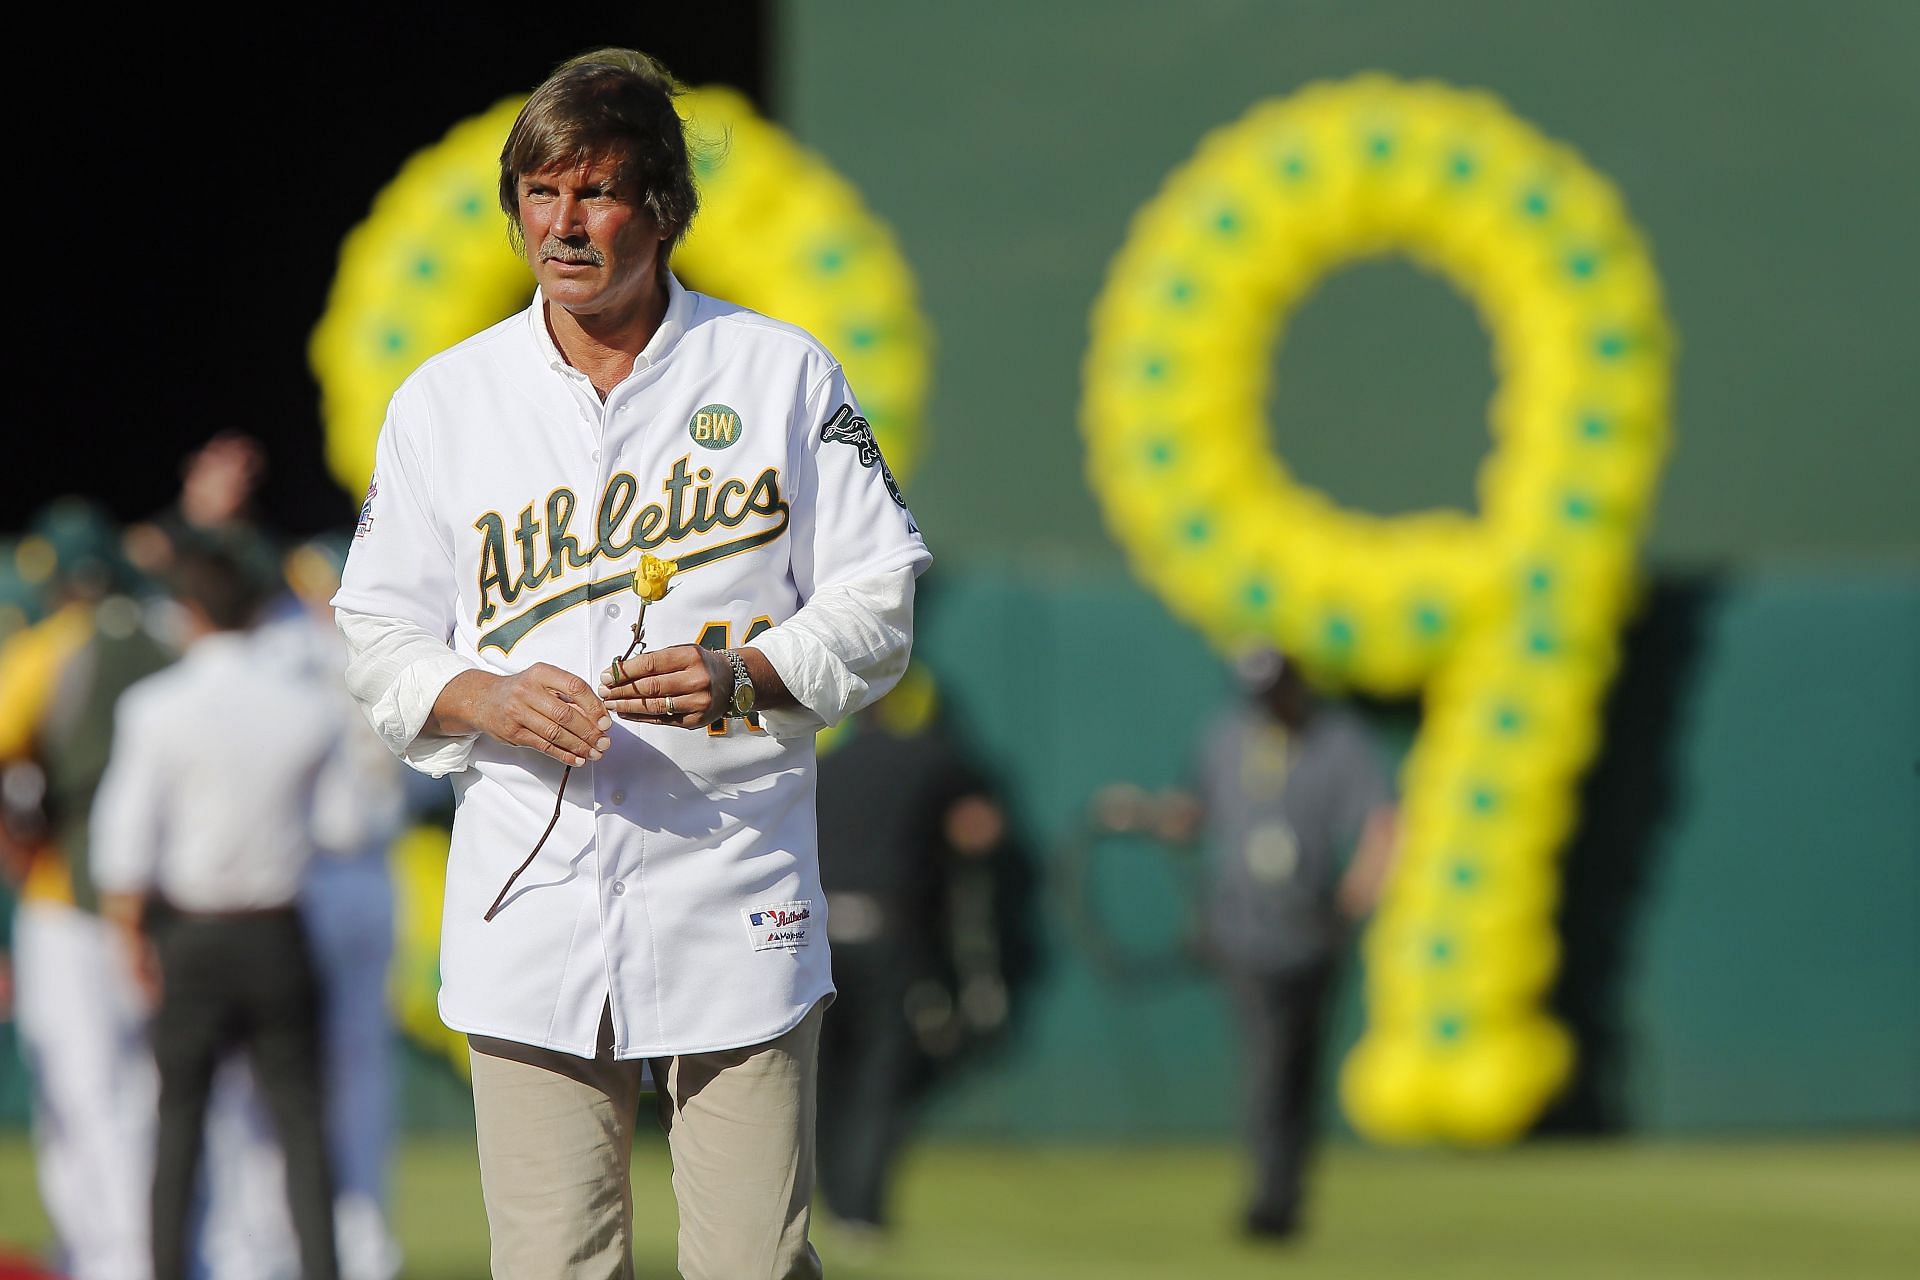 Dennis Eckersley's daughter's history that led to homelessness